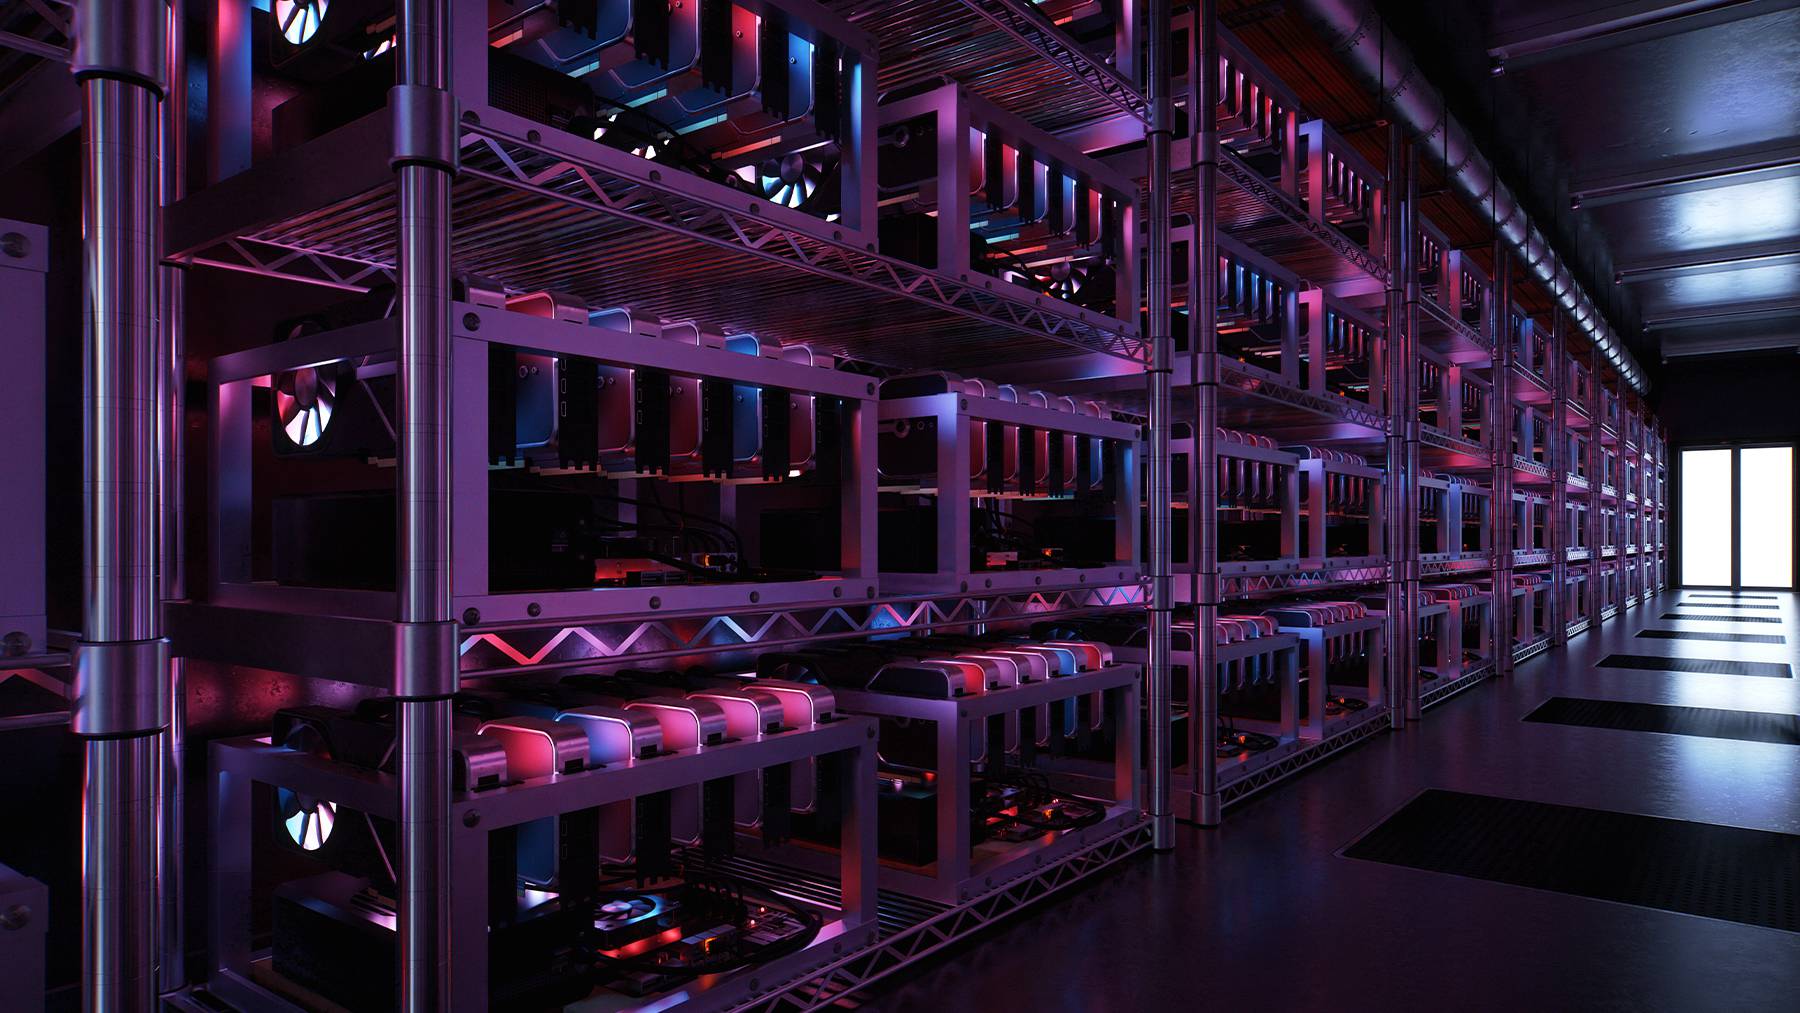 The inside of a data centre for cryptocurrency. Showing purple and blue lighting of a large computer like system with floor to ceiling stacks of wires.